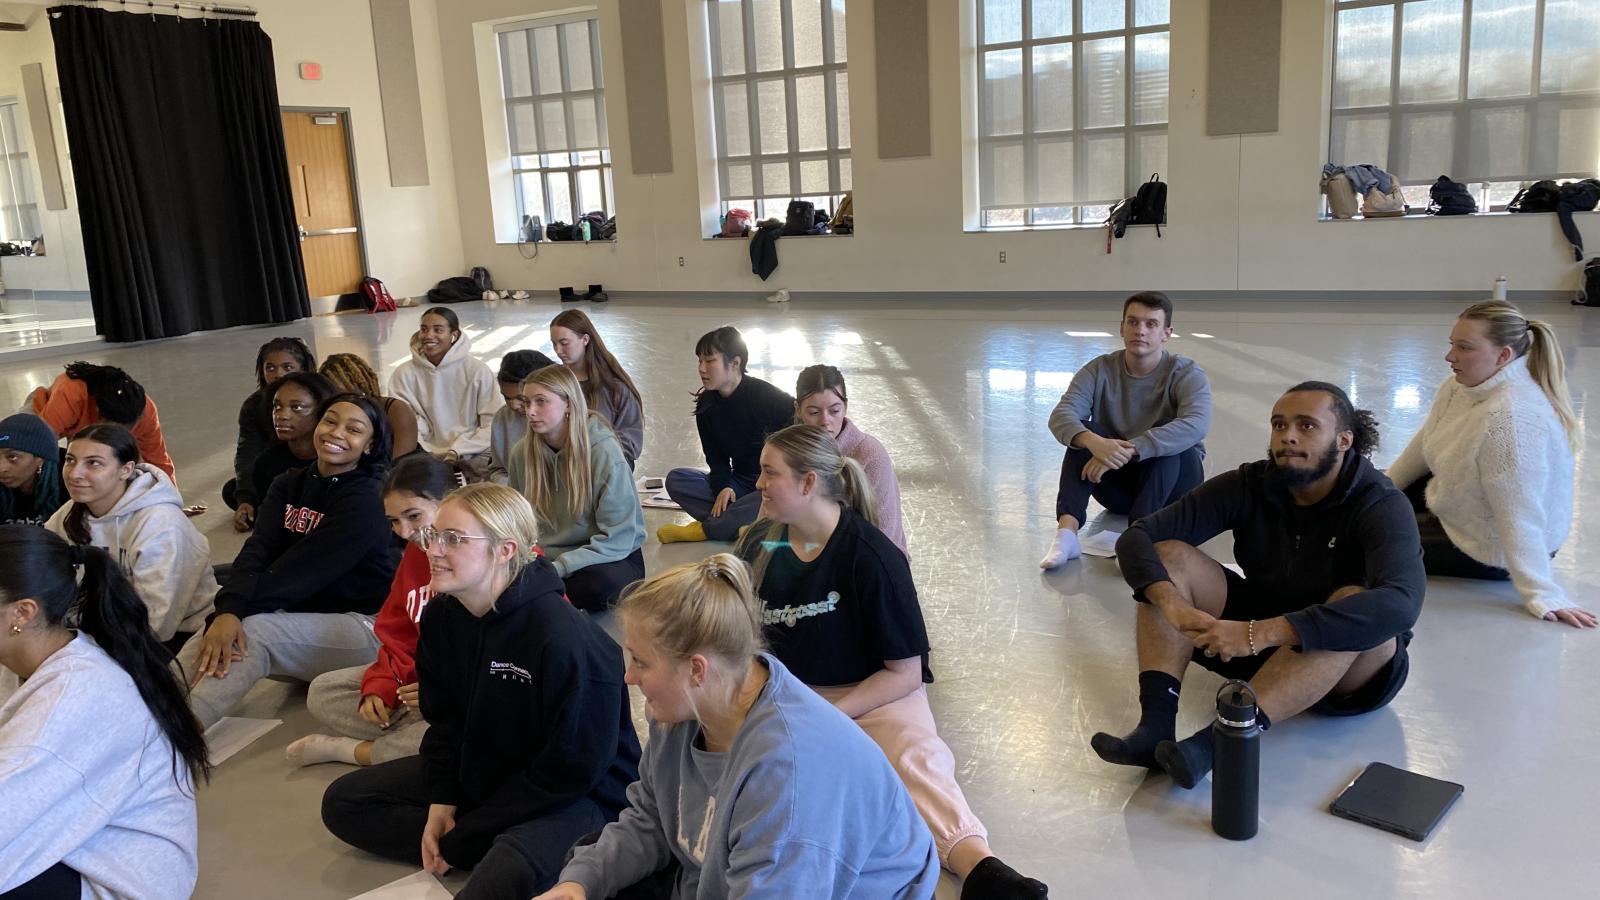 Students sitting on the floor of a dance studio